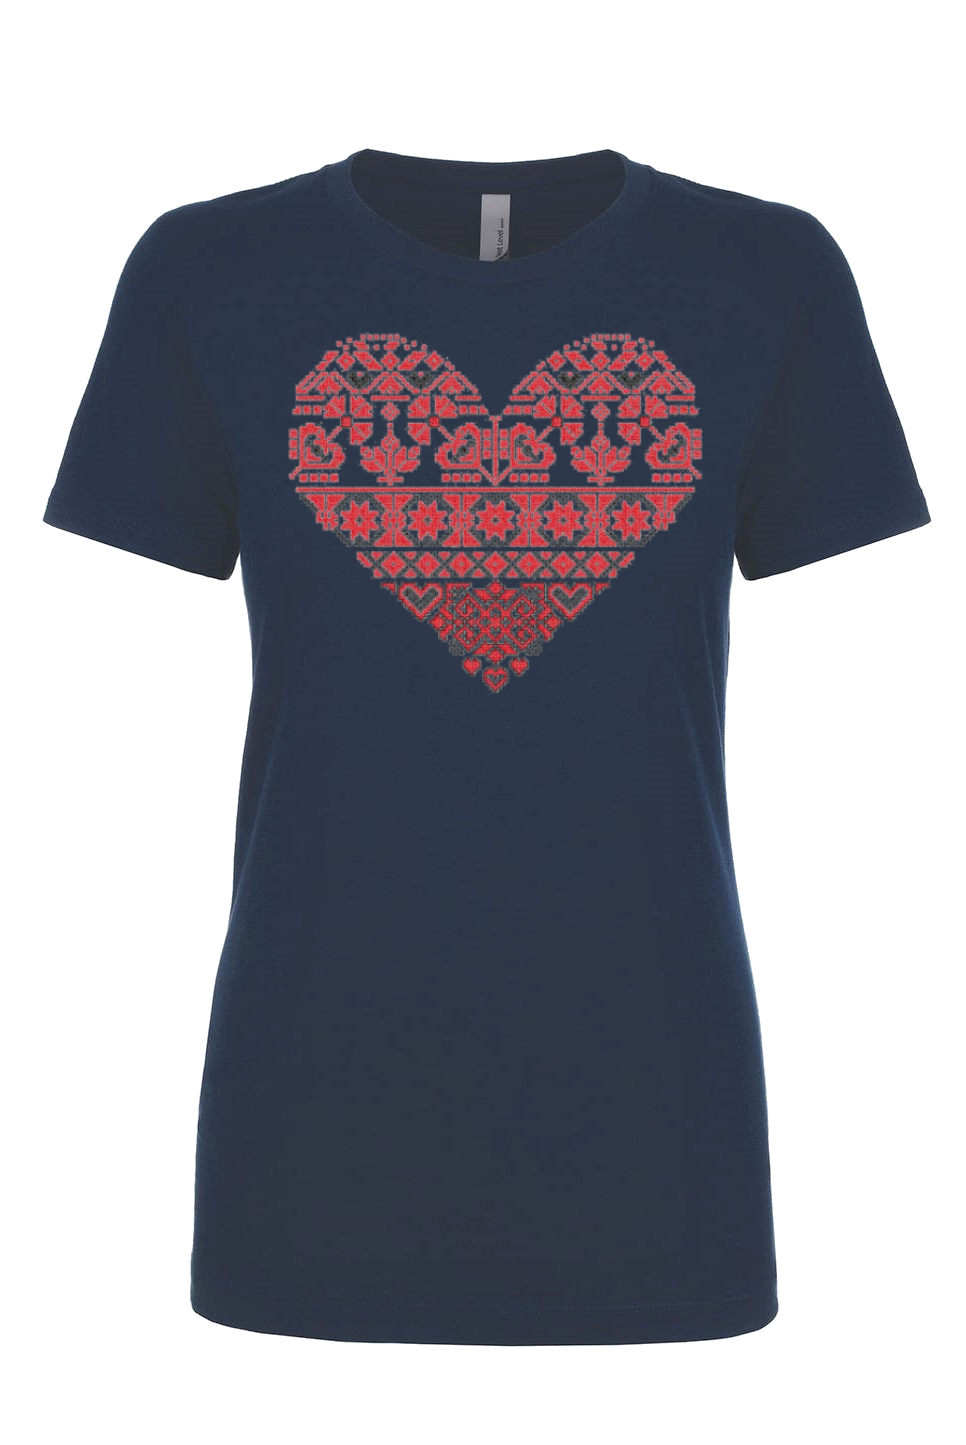 Female fit t-shirt "Red and black heart"